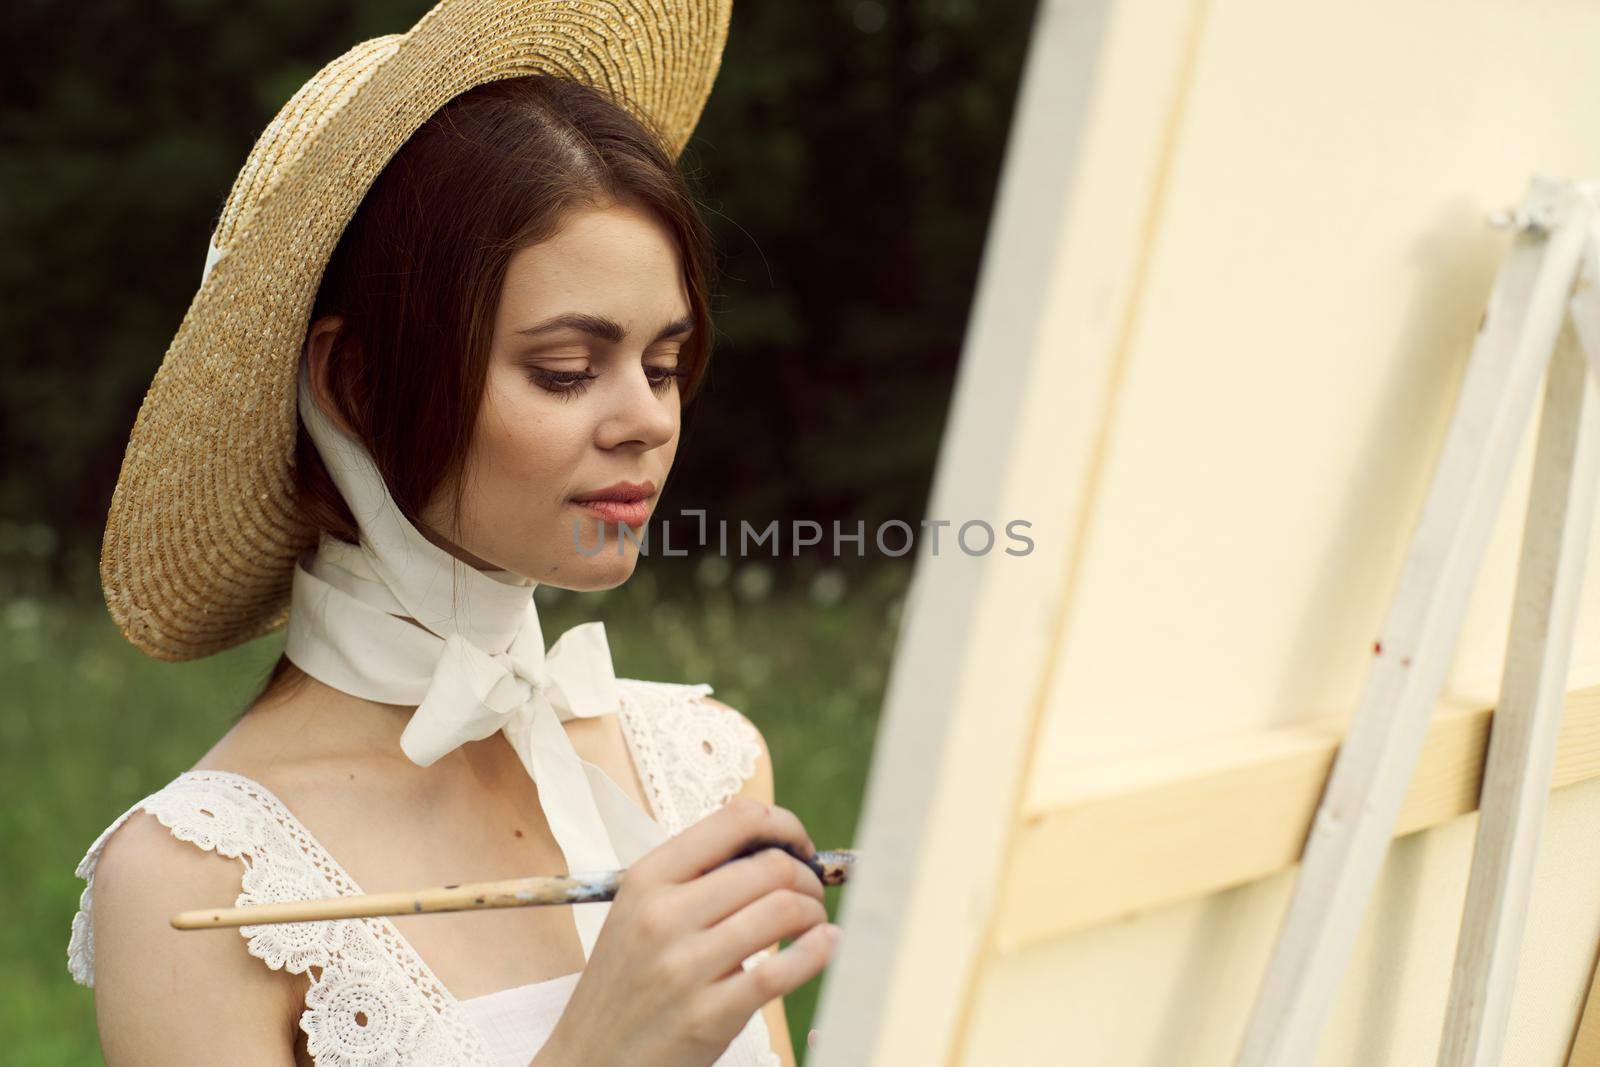 pretty woman artist painting nature painting art hobby. High quality photo